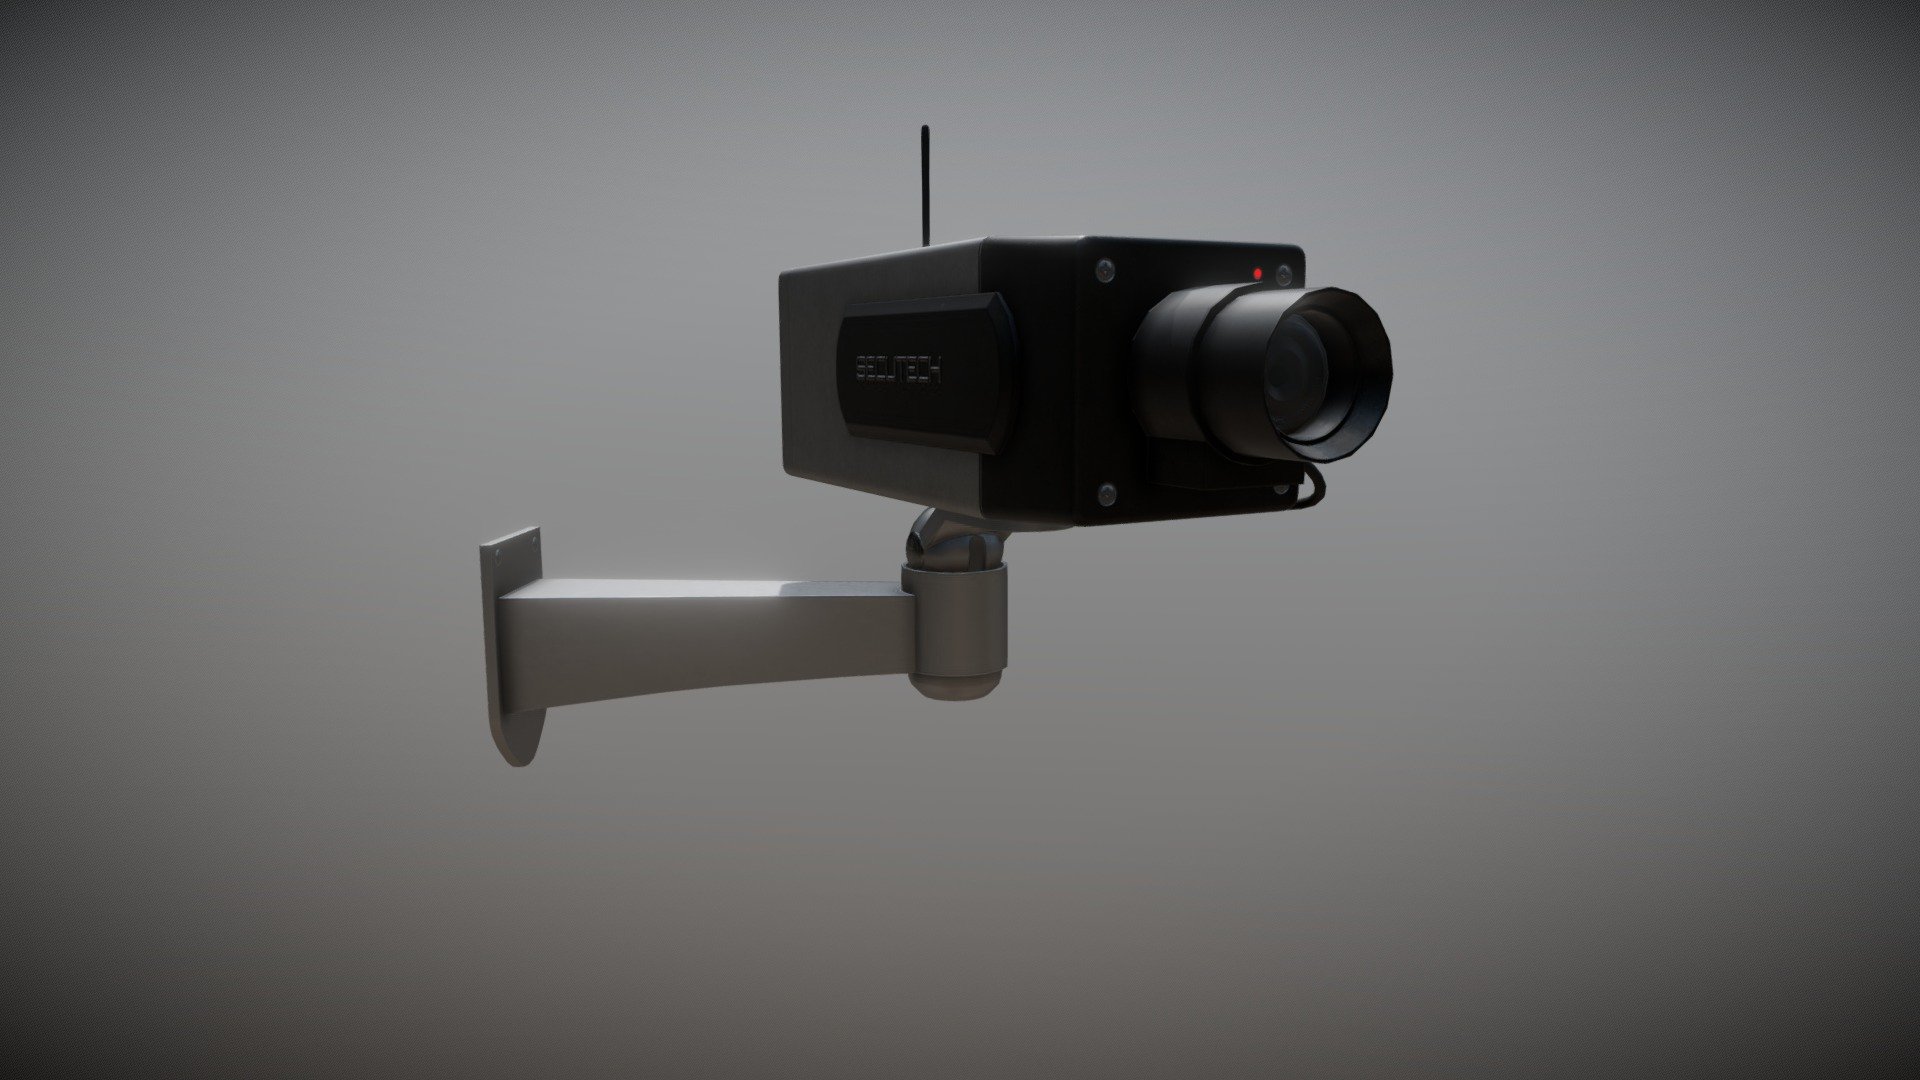 Security camera 3 

Low poly model, game ready 3d model